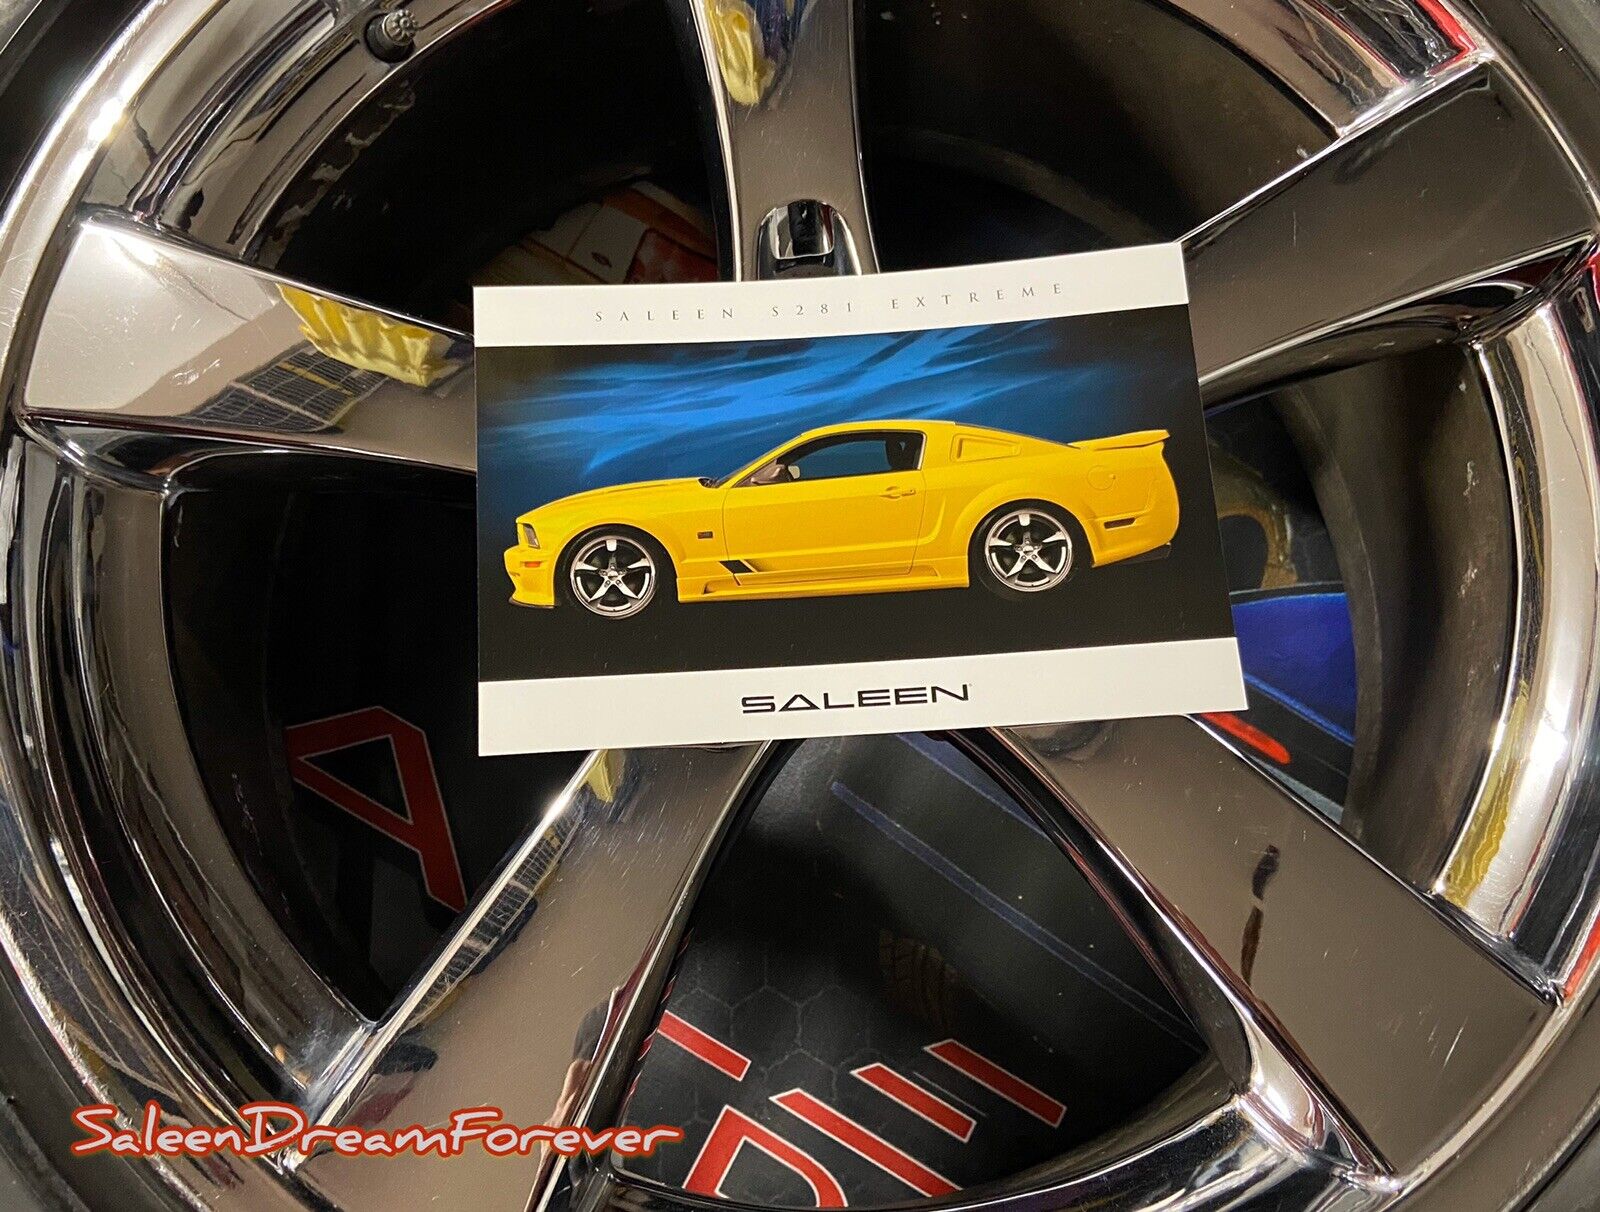 2006 SALEEN S281E EXTREME MUSTANG SALES BROCHURE CARD NOS FORD COBRA SHELBY GT